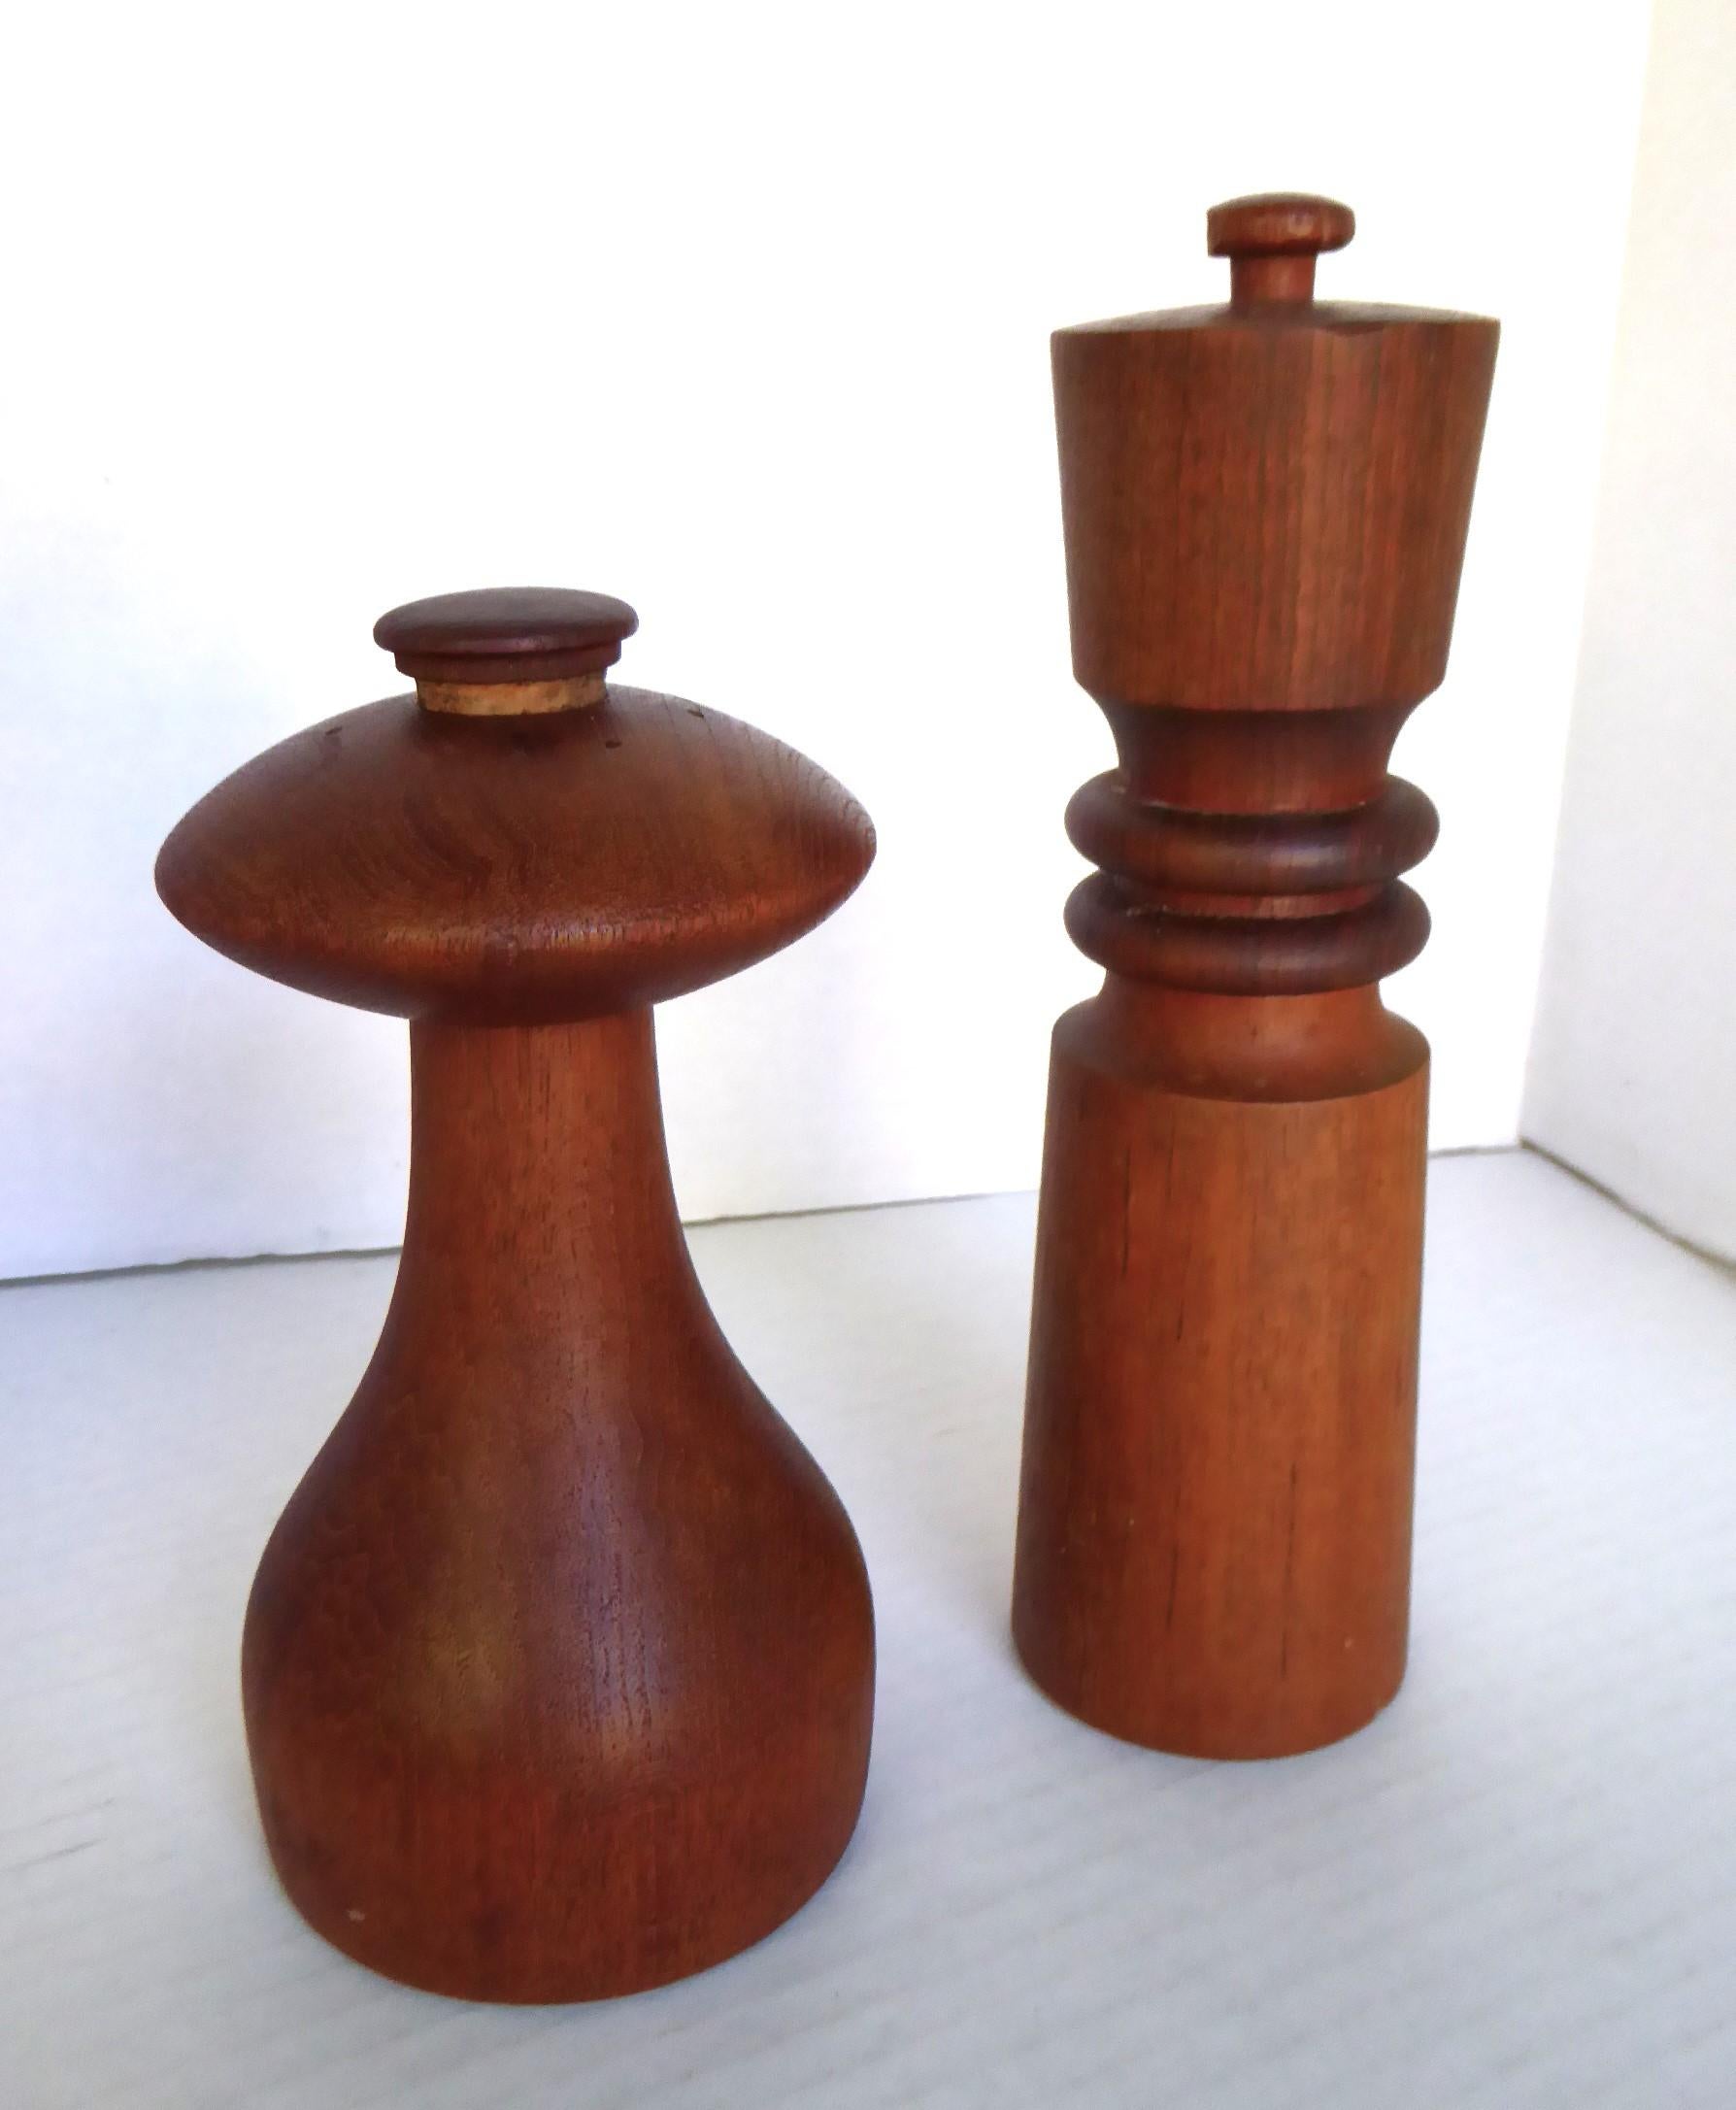 Great Mid-Century Modern teak peppermill / salt shaker combo by Jens Harald Quistgaard for Dansk Designs. Ground pepper comes out of the bottom when top turns and salt sprinkles from top when placed upside down. Refill for salt is by removing the